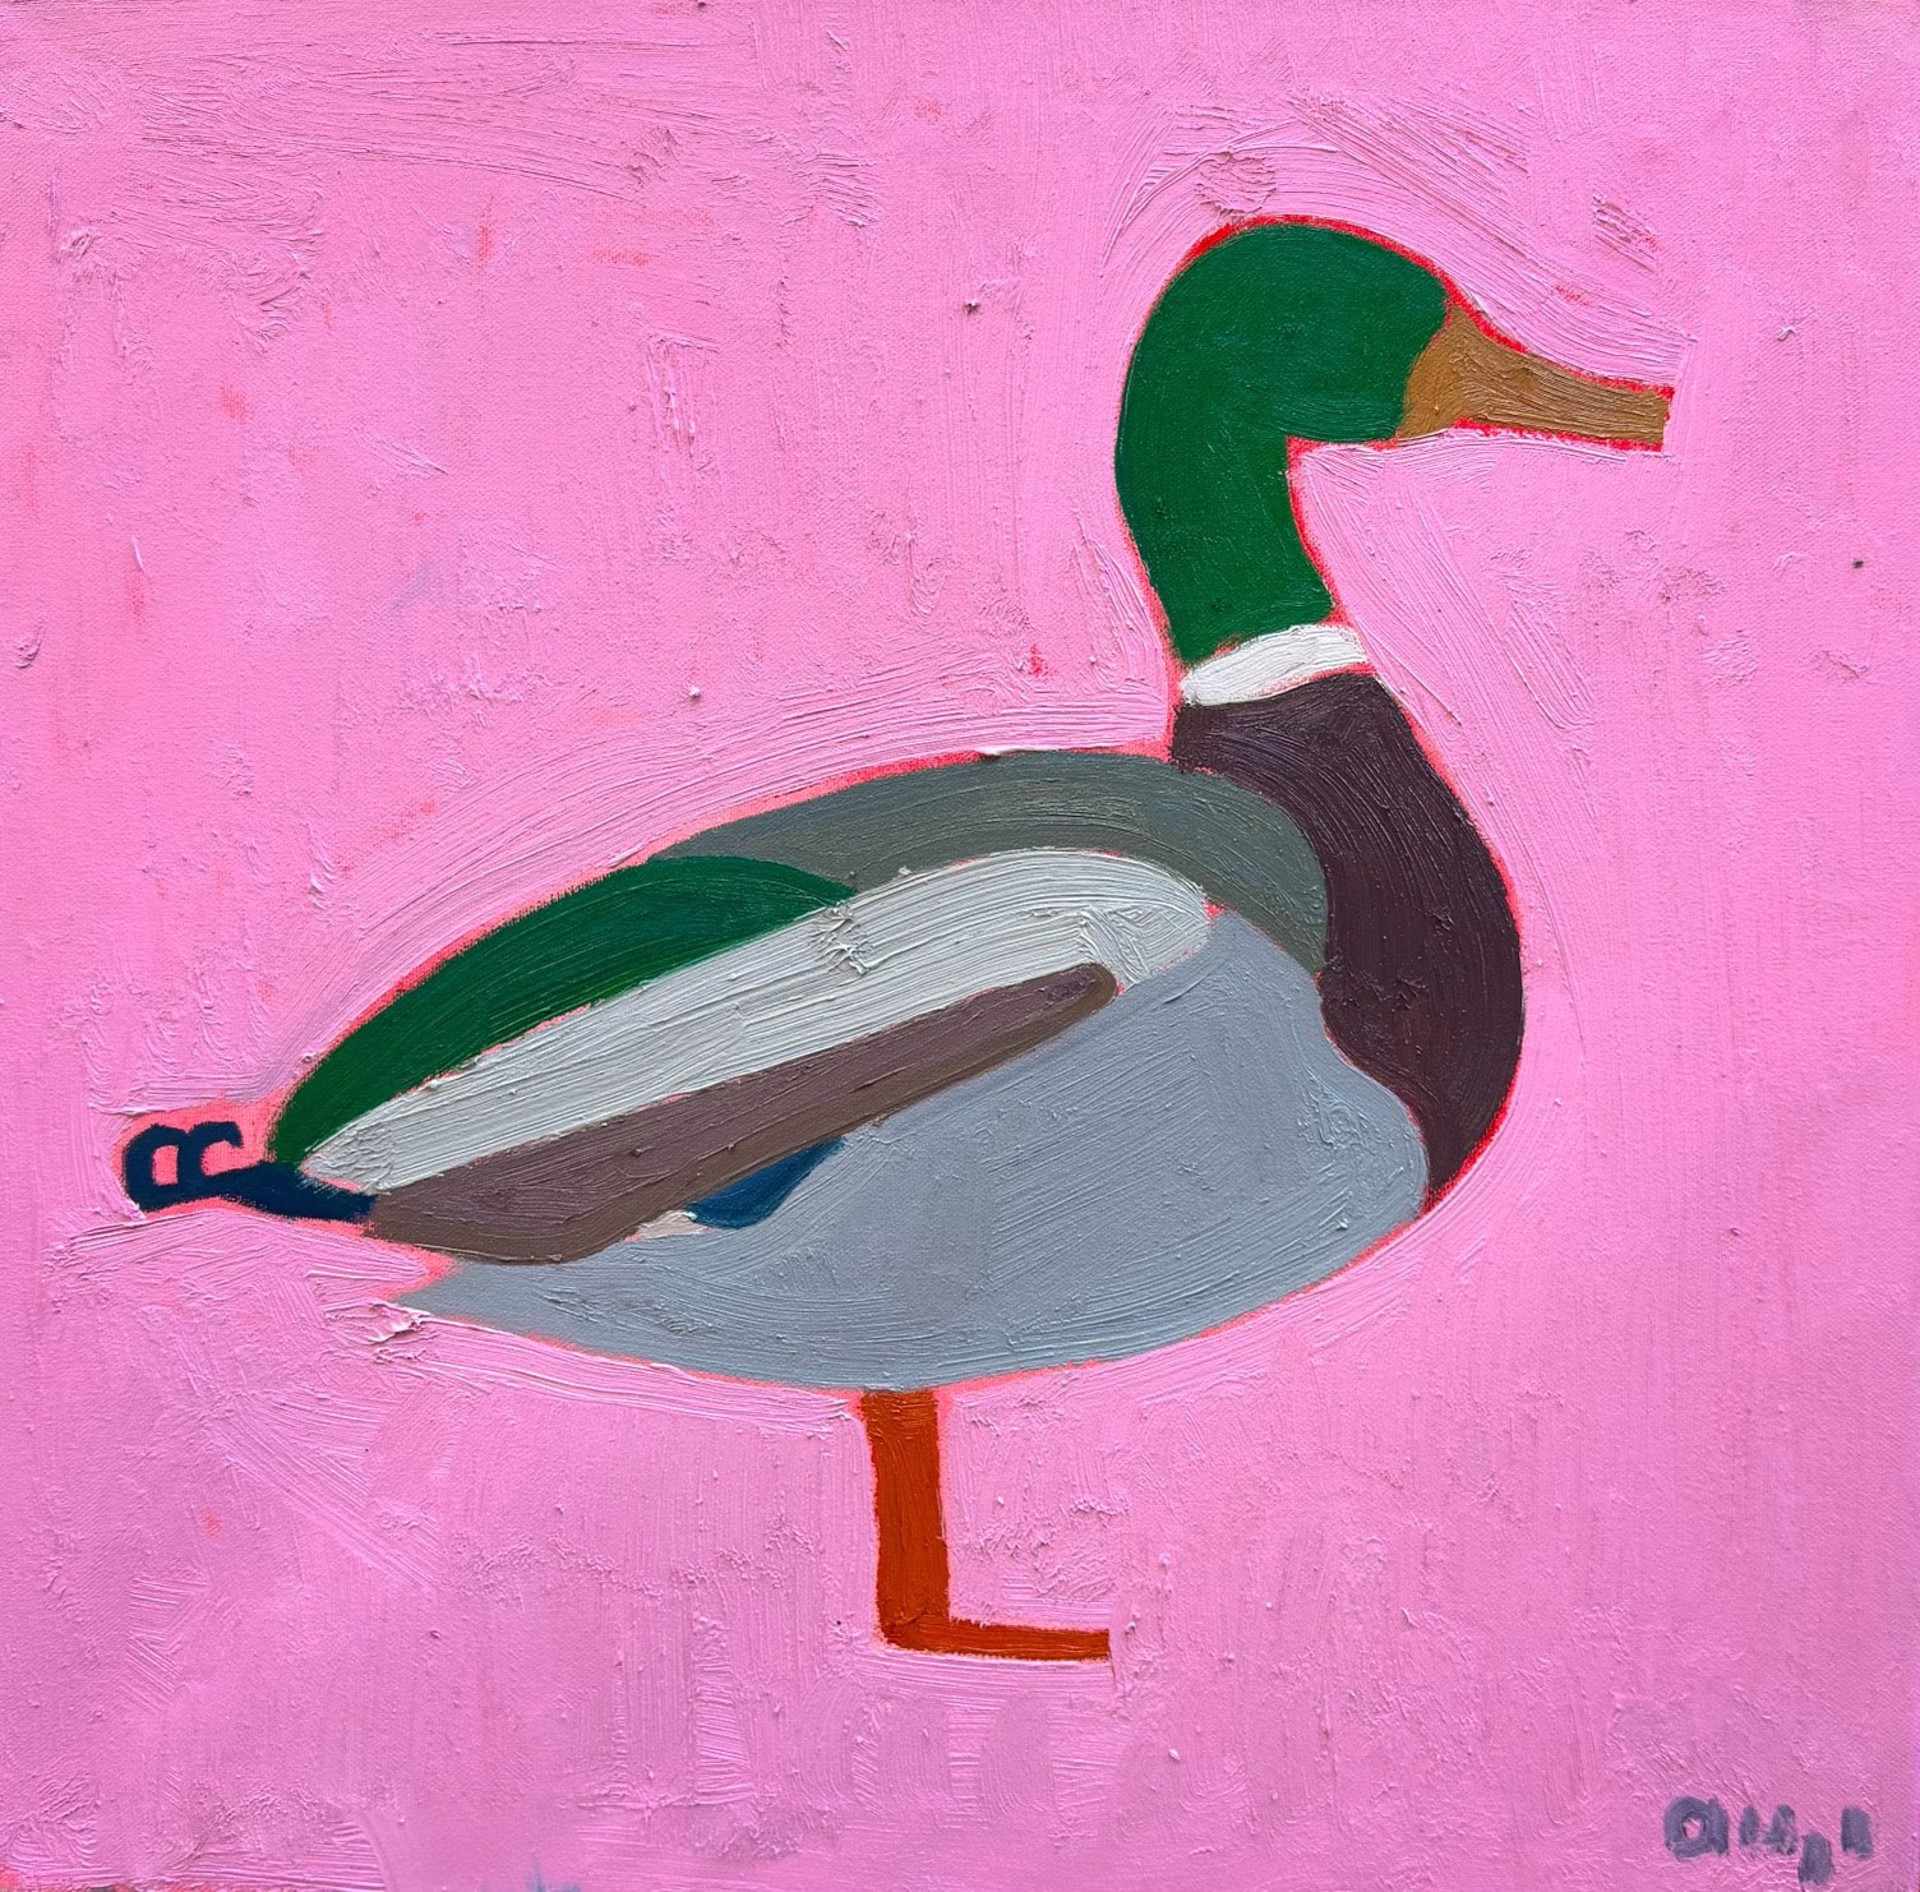 Original Oil Painting By Aaron Hazel Featuring A Mallard Duck Painted On Top Of Bubblegum Pink Background